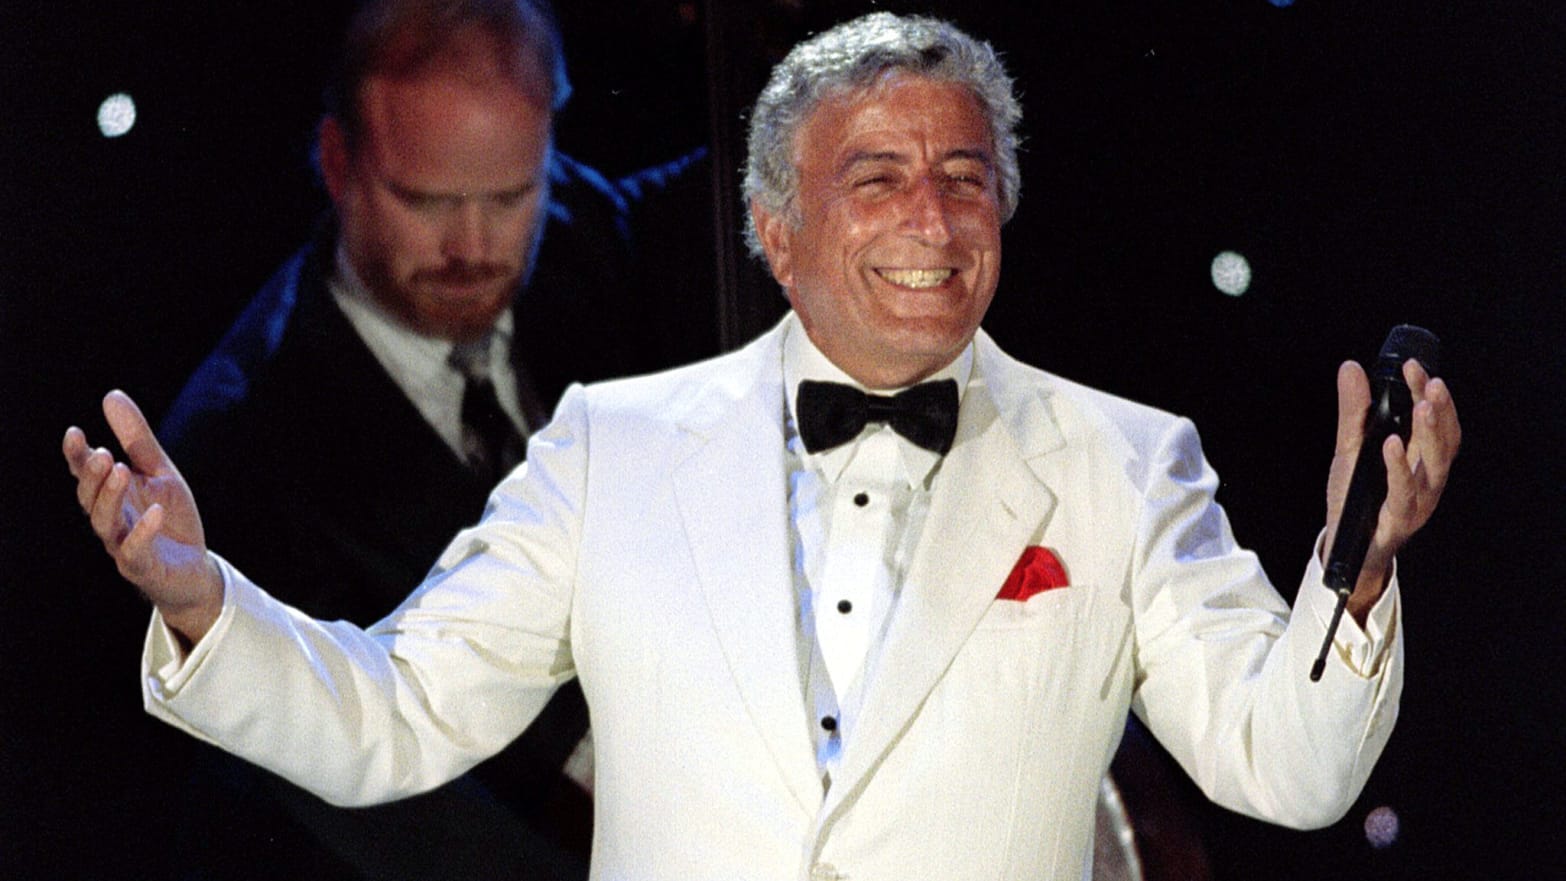 American singer Tony Bennett performs during the World Music Awards on May 3, 1995.